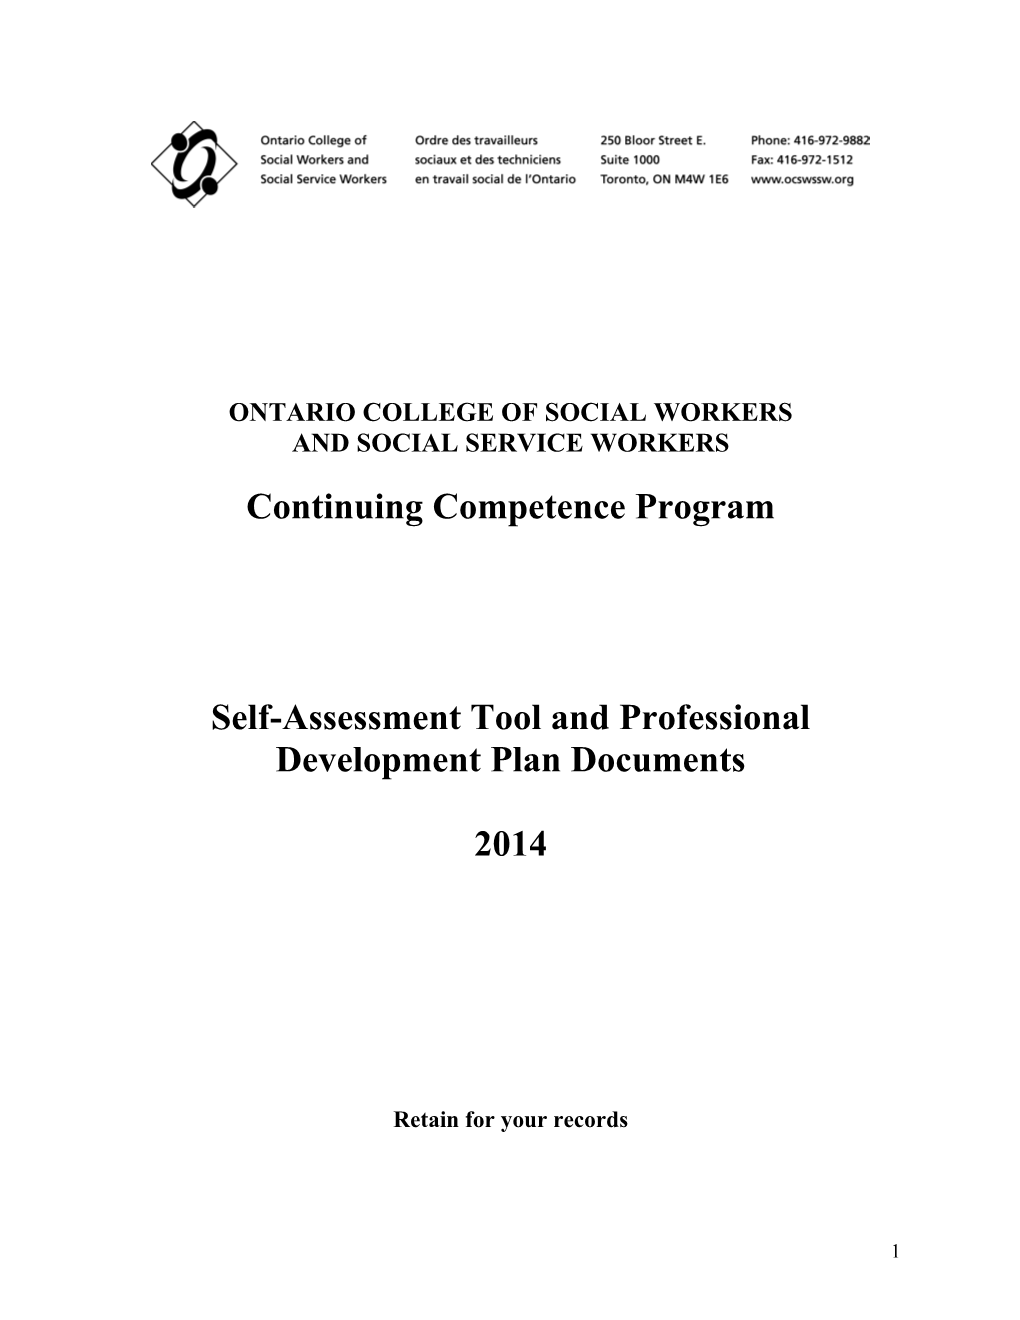 Ontario College of Social Workers